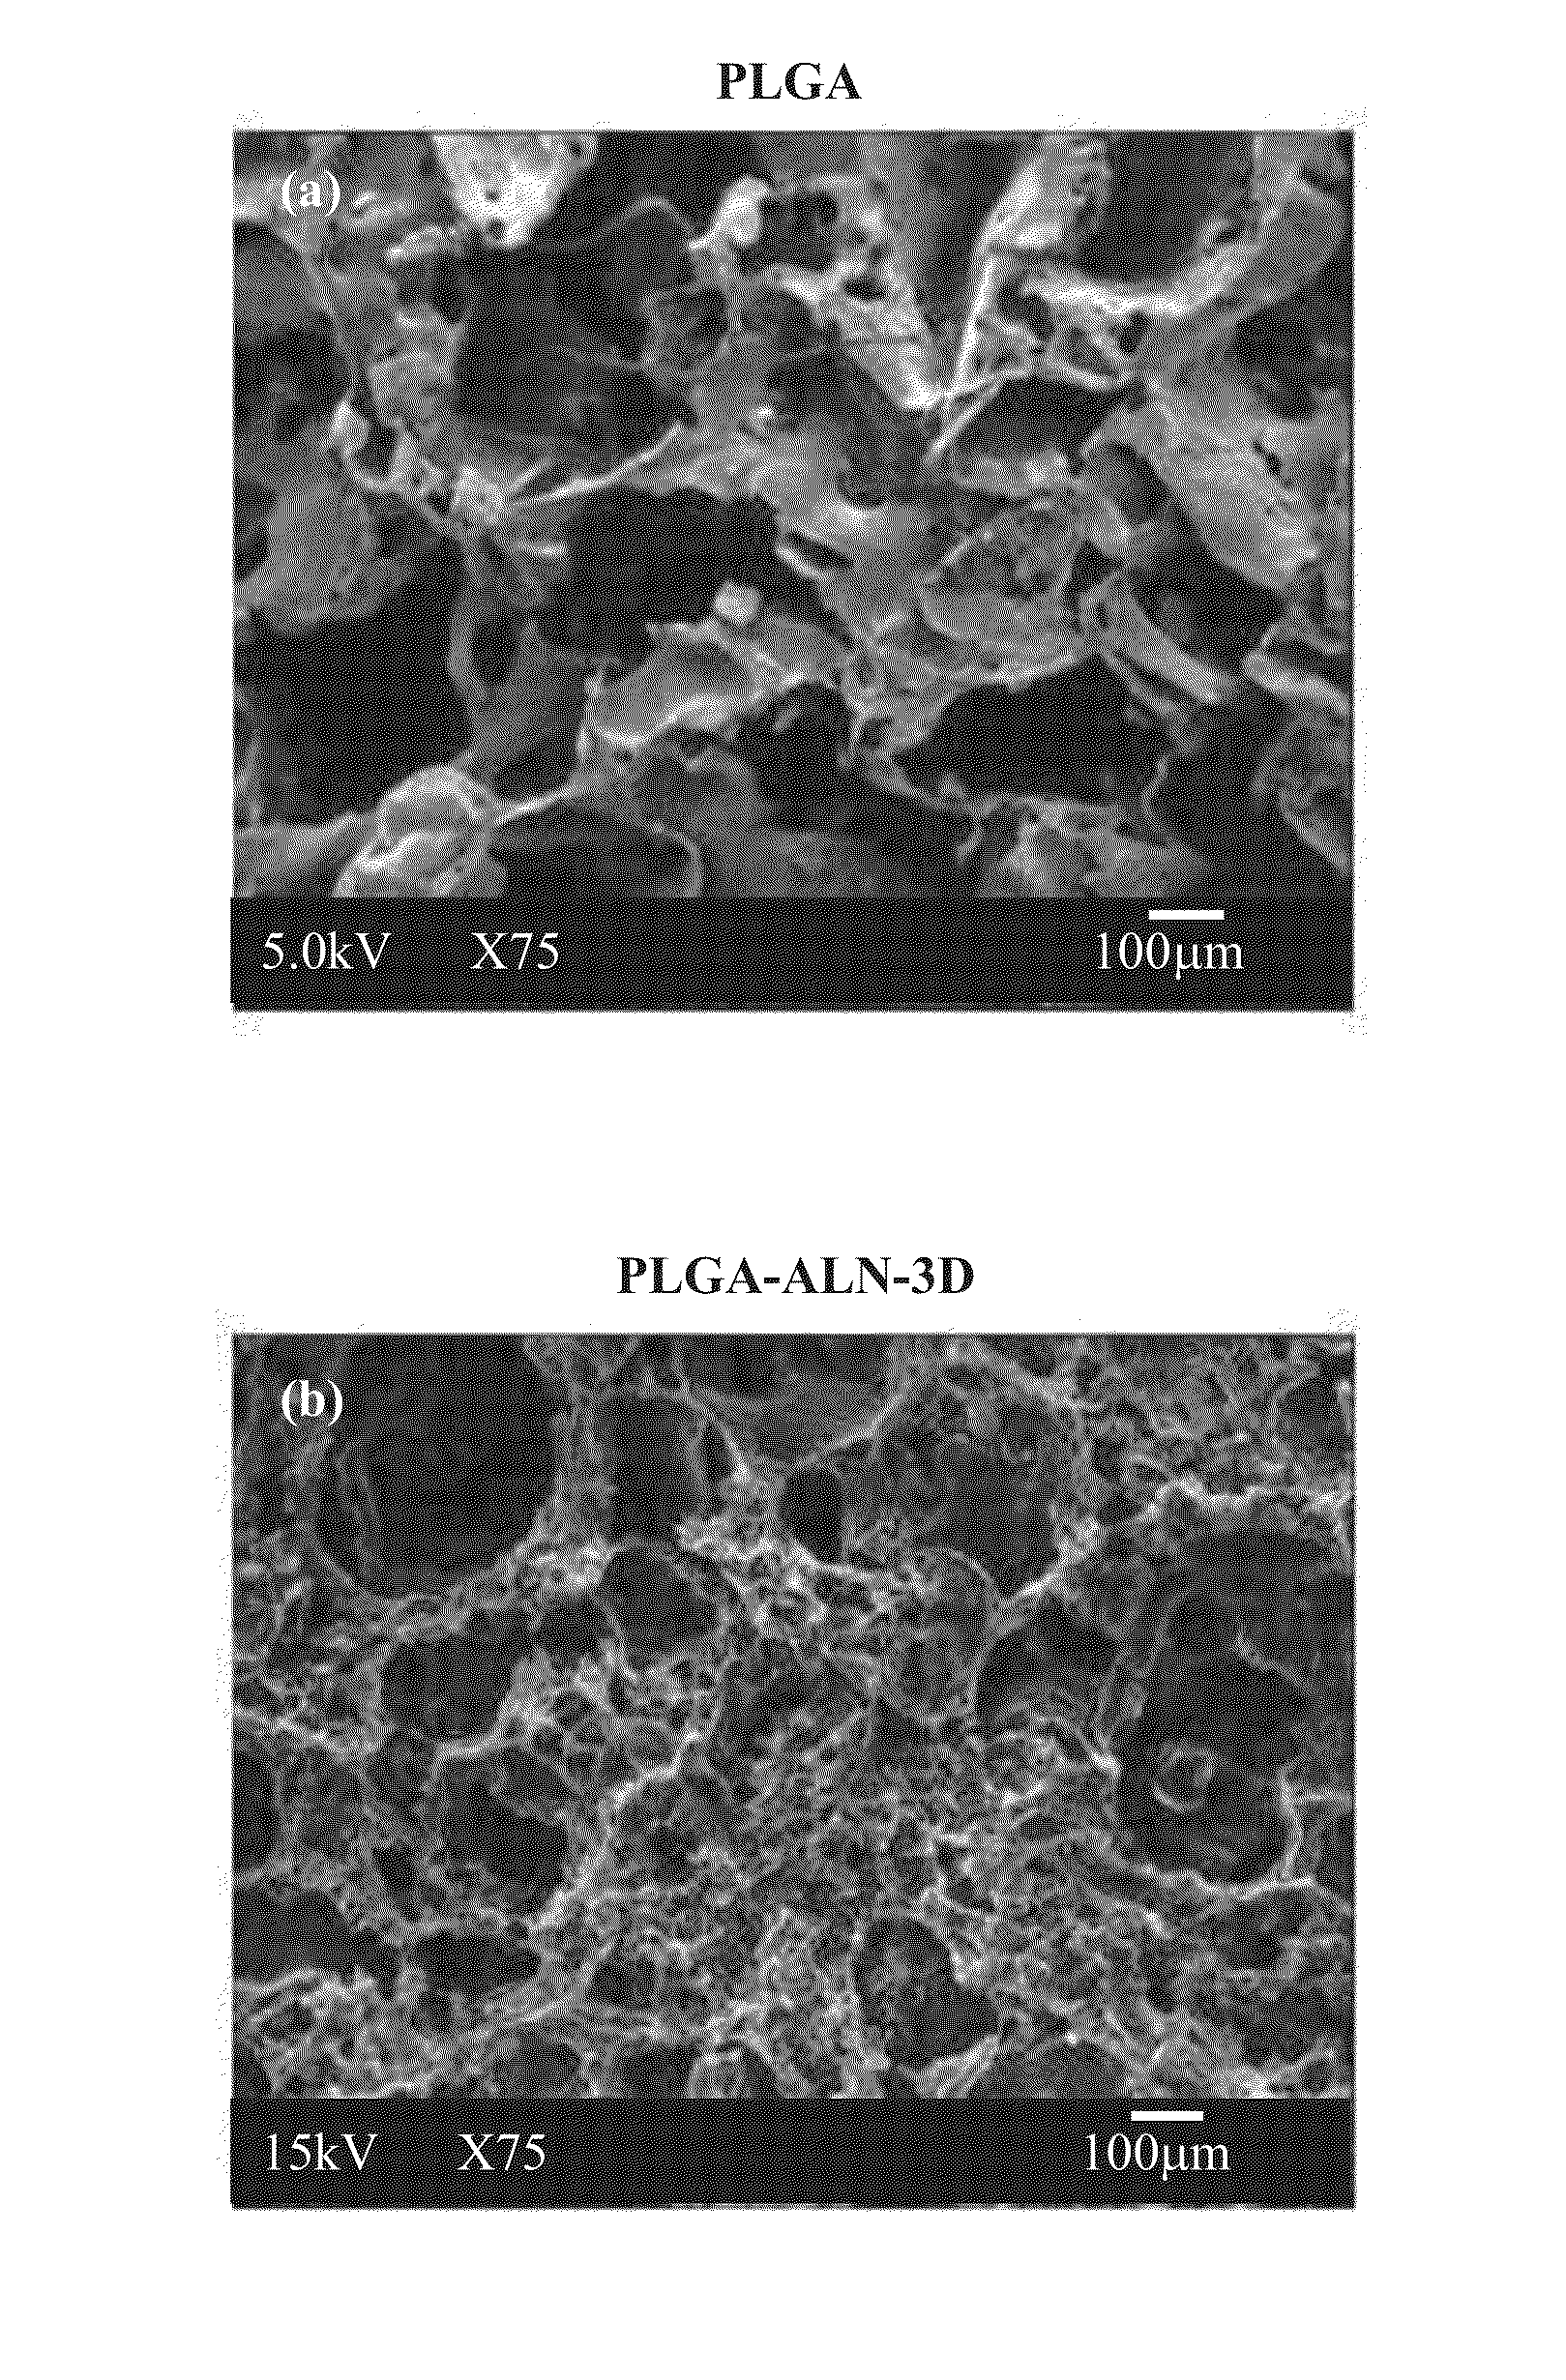 Method for bone formation by administering poly(lactic-co-glycolic acid) cross-linked alendronate